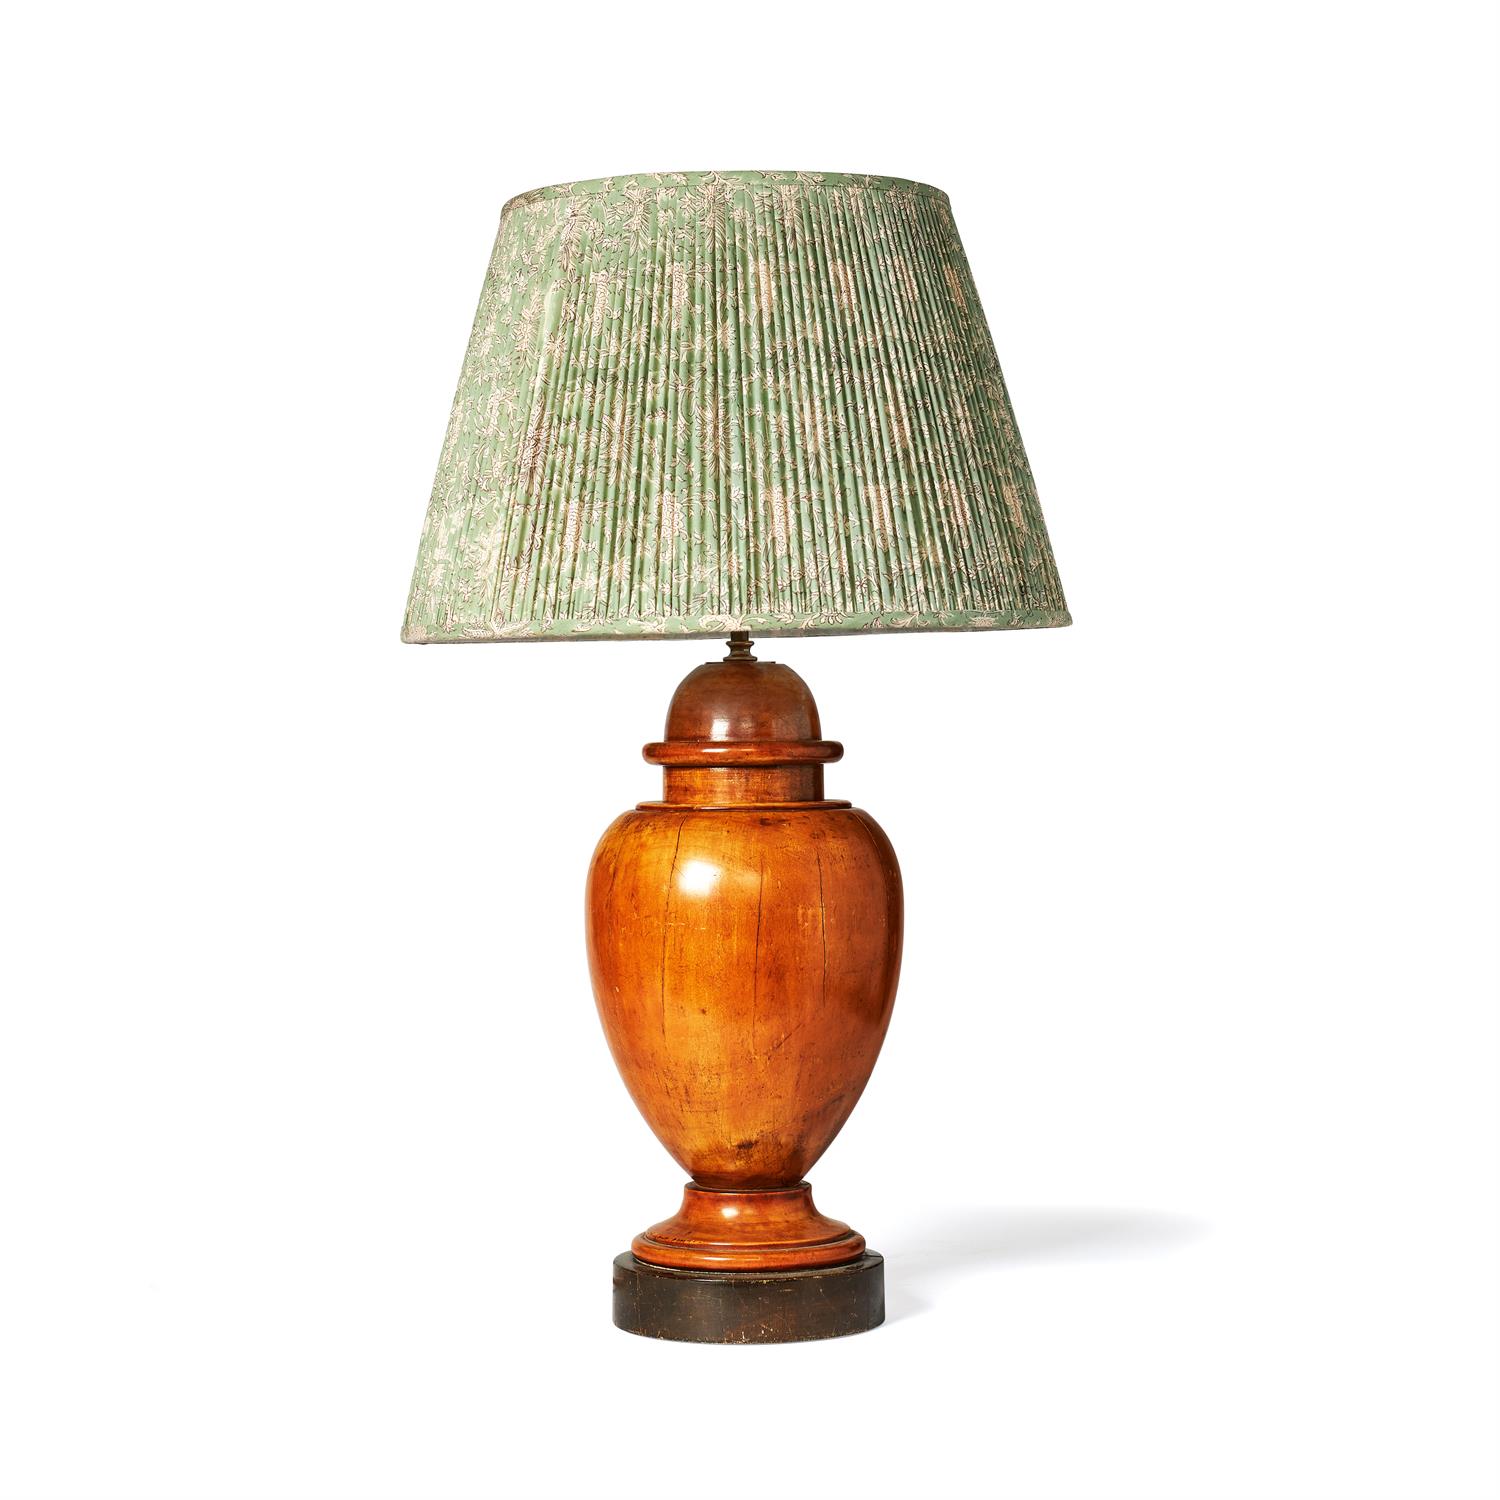 A turned fruitwood urn fitted as a table lamp